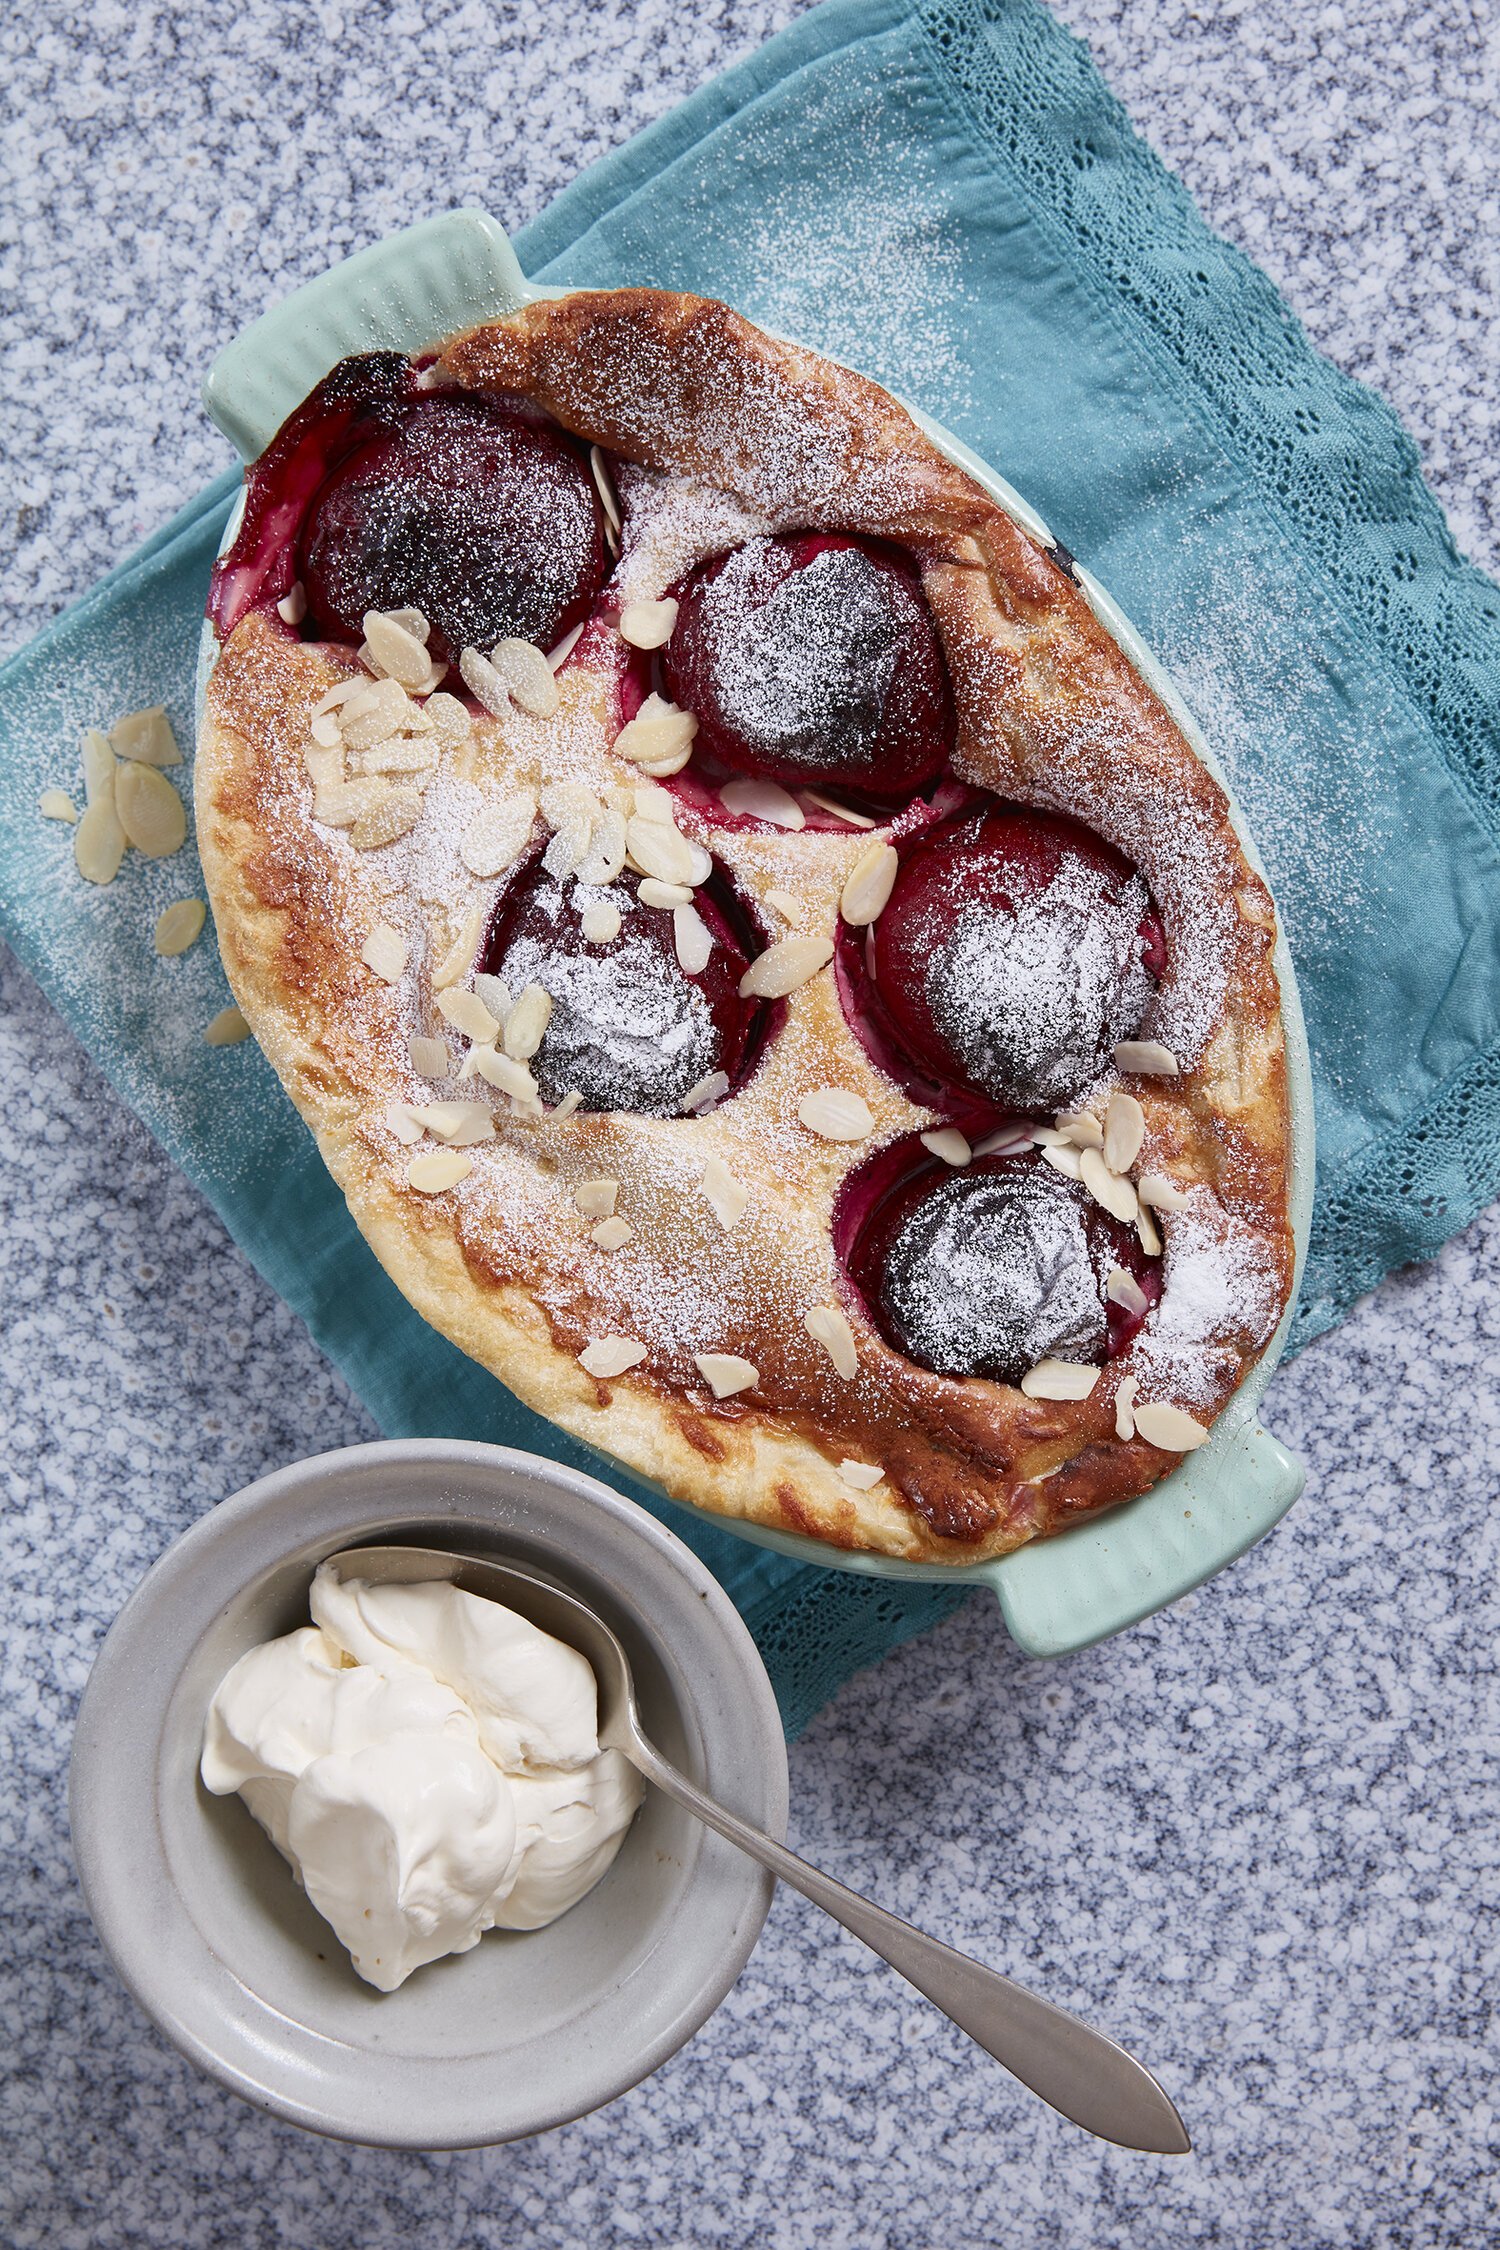 SOUTH AFRICAN PLUM AND ALMOND PUDDING WITH BRANDY CREAM